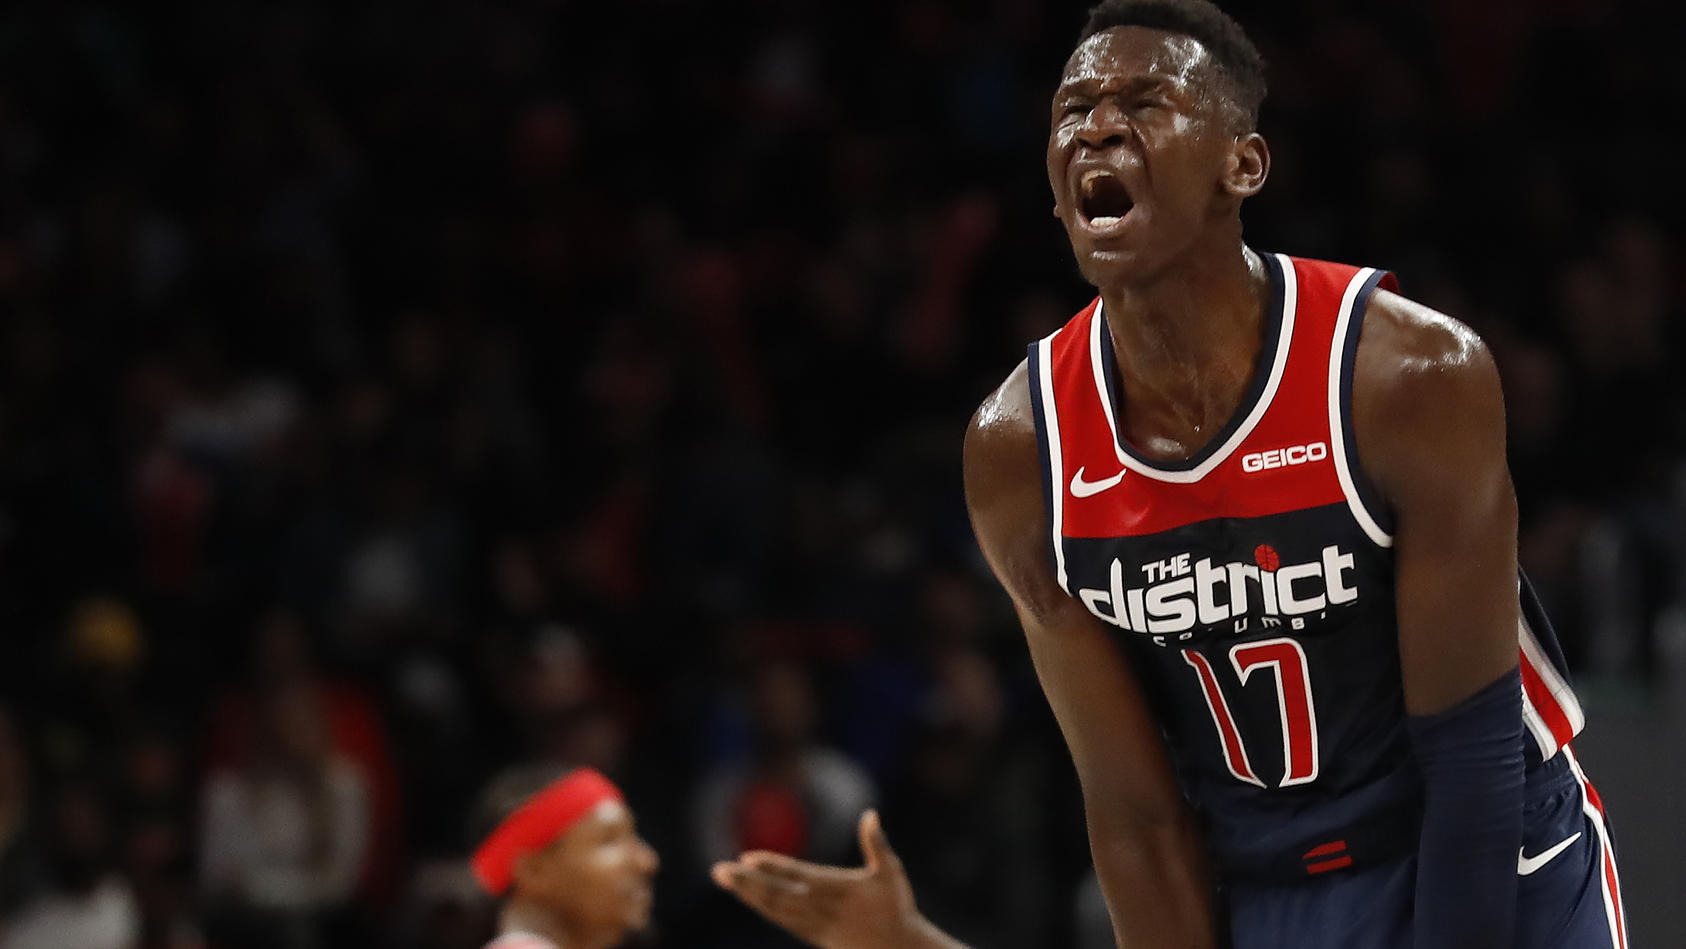 Oct 30, 2019; Washington, DC, USA; Washington Wizards guard Isaac Bonga (17) reacts after being called for a foul on Houston Rockets guard James Harden (13) in the fourth quarter at Capital One Arena. Mandatory Credit: Geoff Burke-USA TODAY Sports